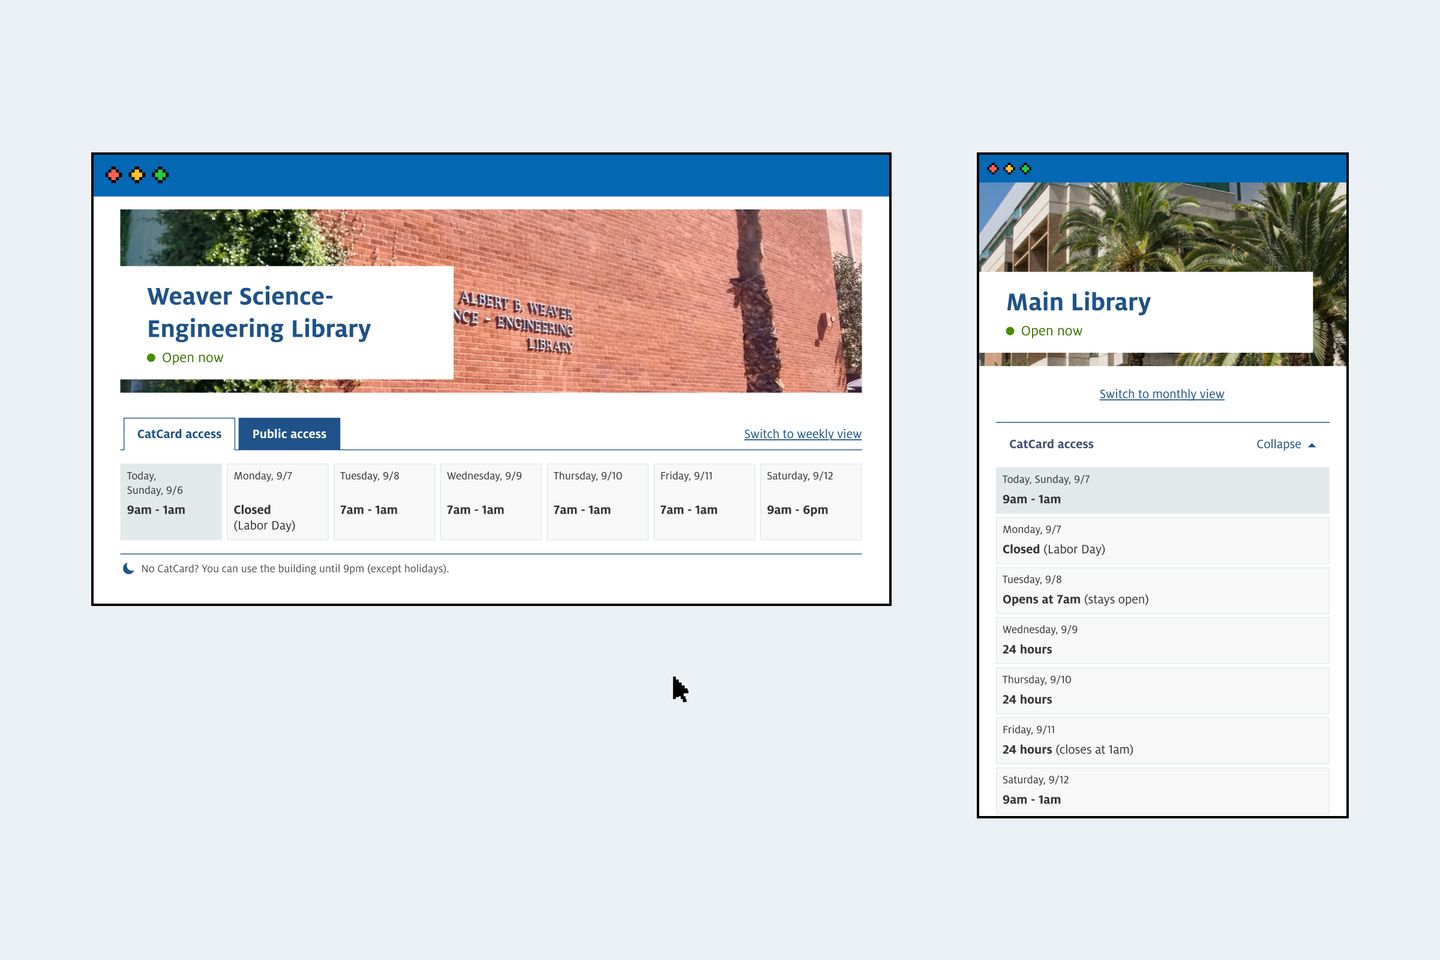 Design components used on the library hours page